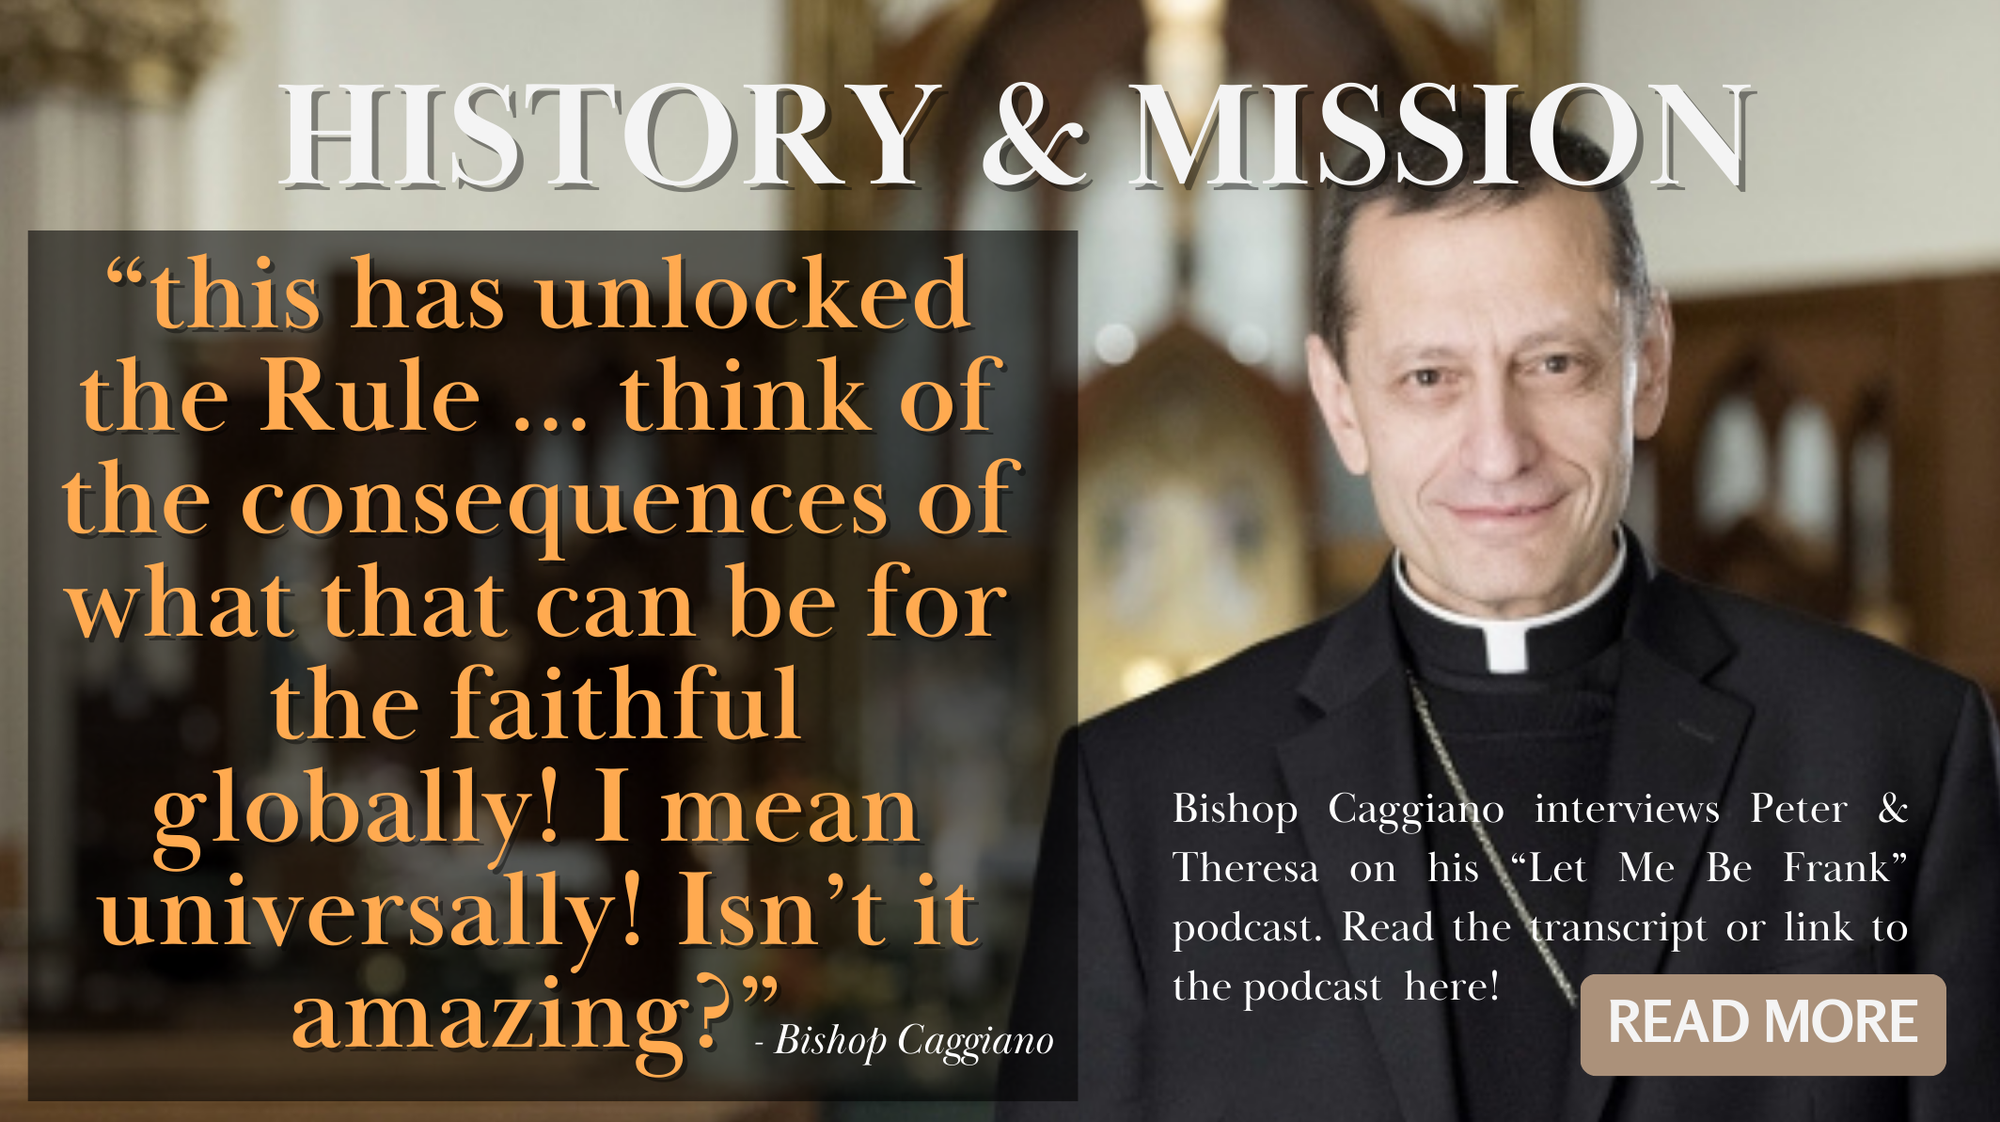 History & Mission: "this has unlocked the Rule ... think of the consequences of what that can be for the faithful globally! I mean universally! Isn’t it amazing?" - Bishop Caggiano